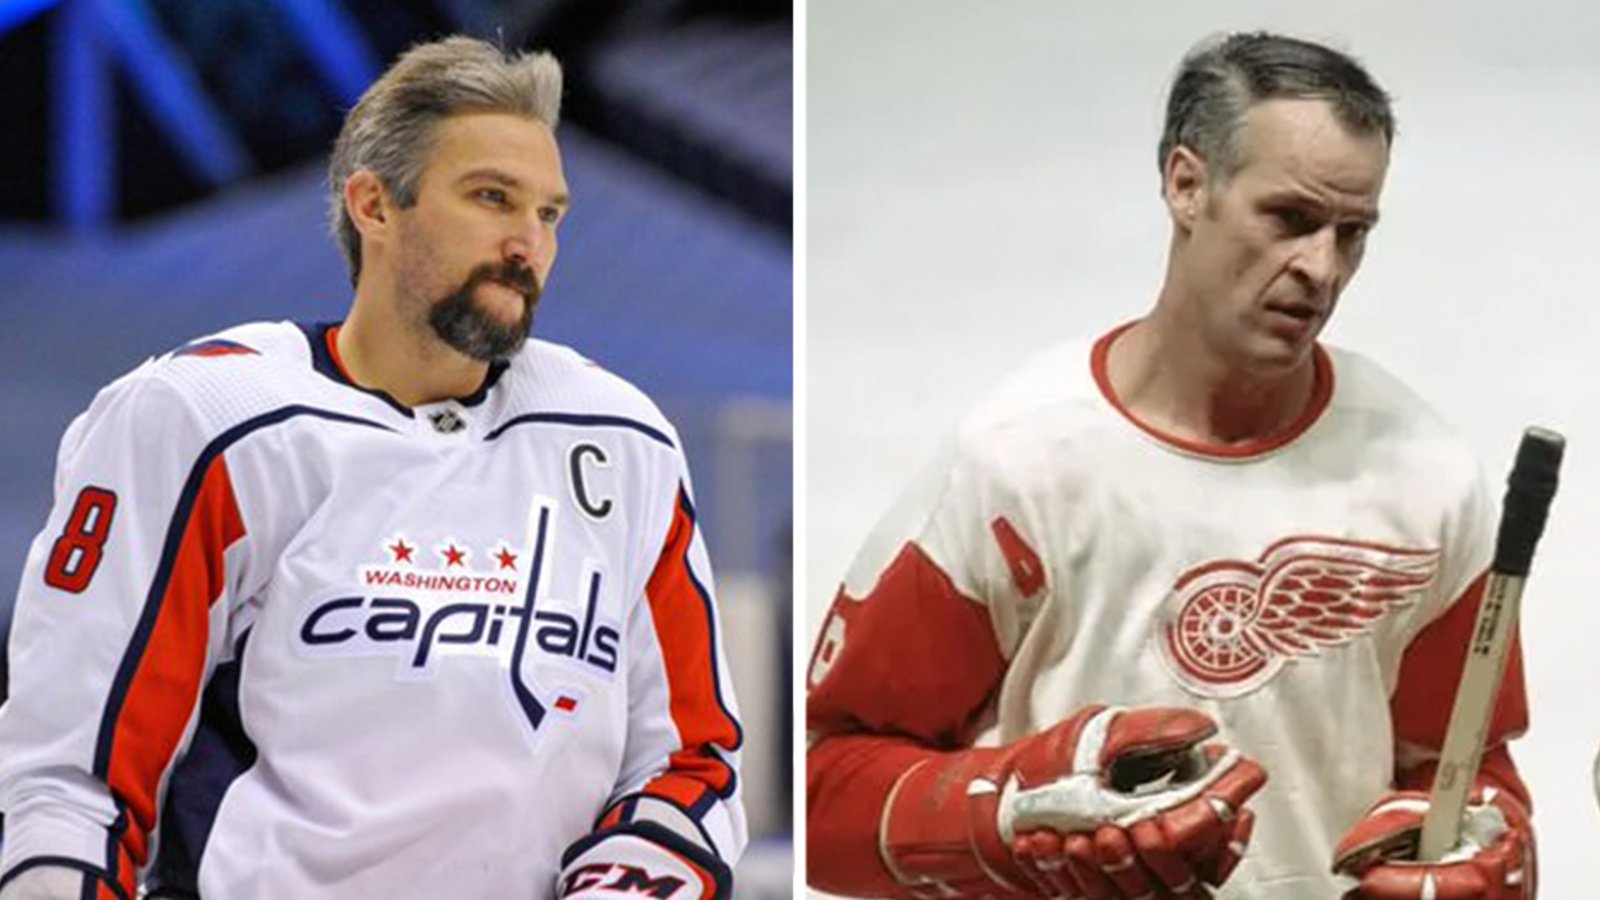 Ovechkin passes Gordie Howe in the record books